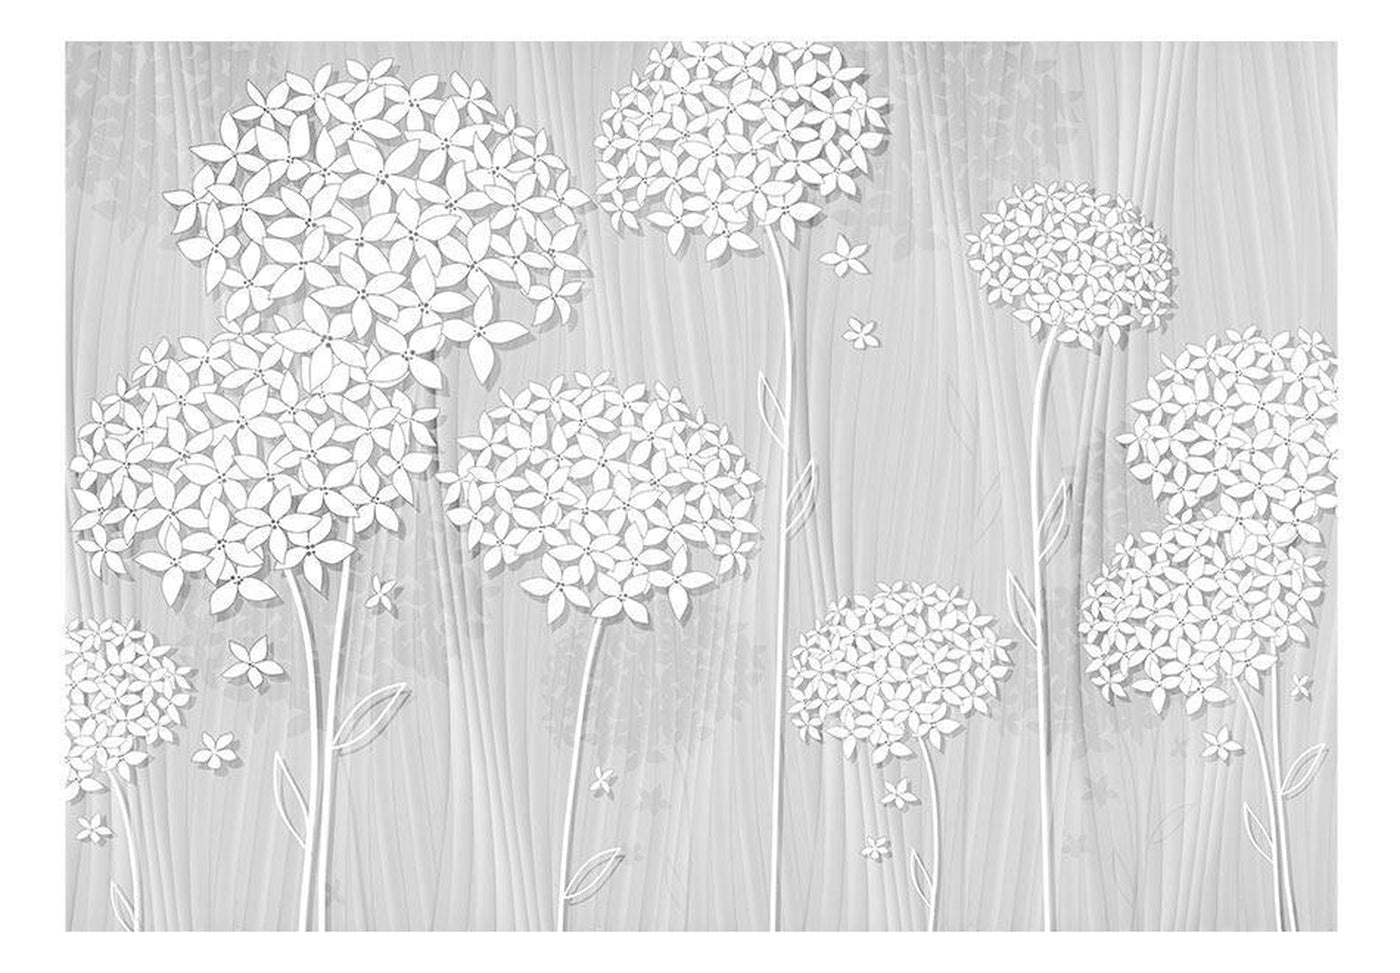 Peel and stick wall mural - Delicate Shade-TipTopHomeDecor